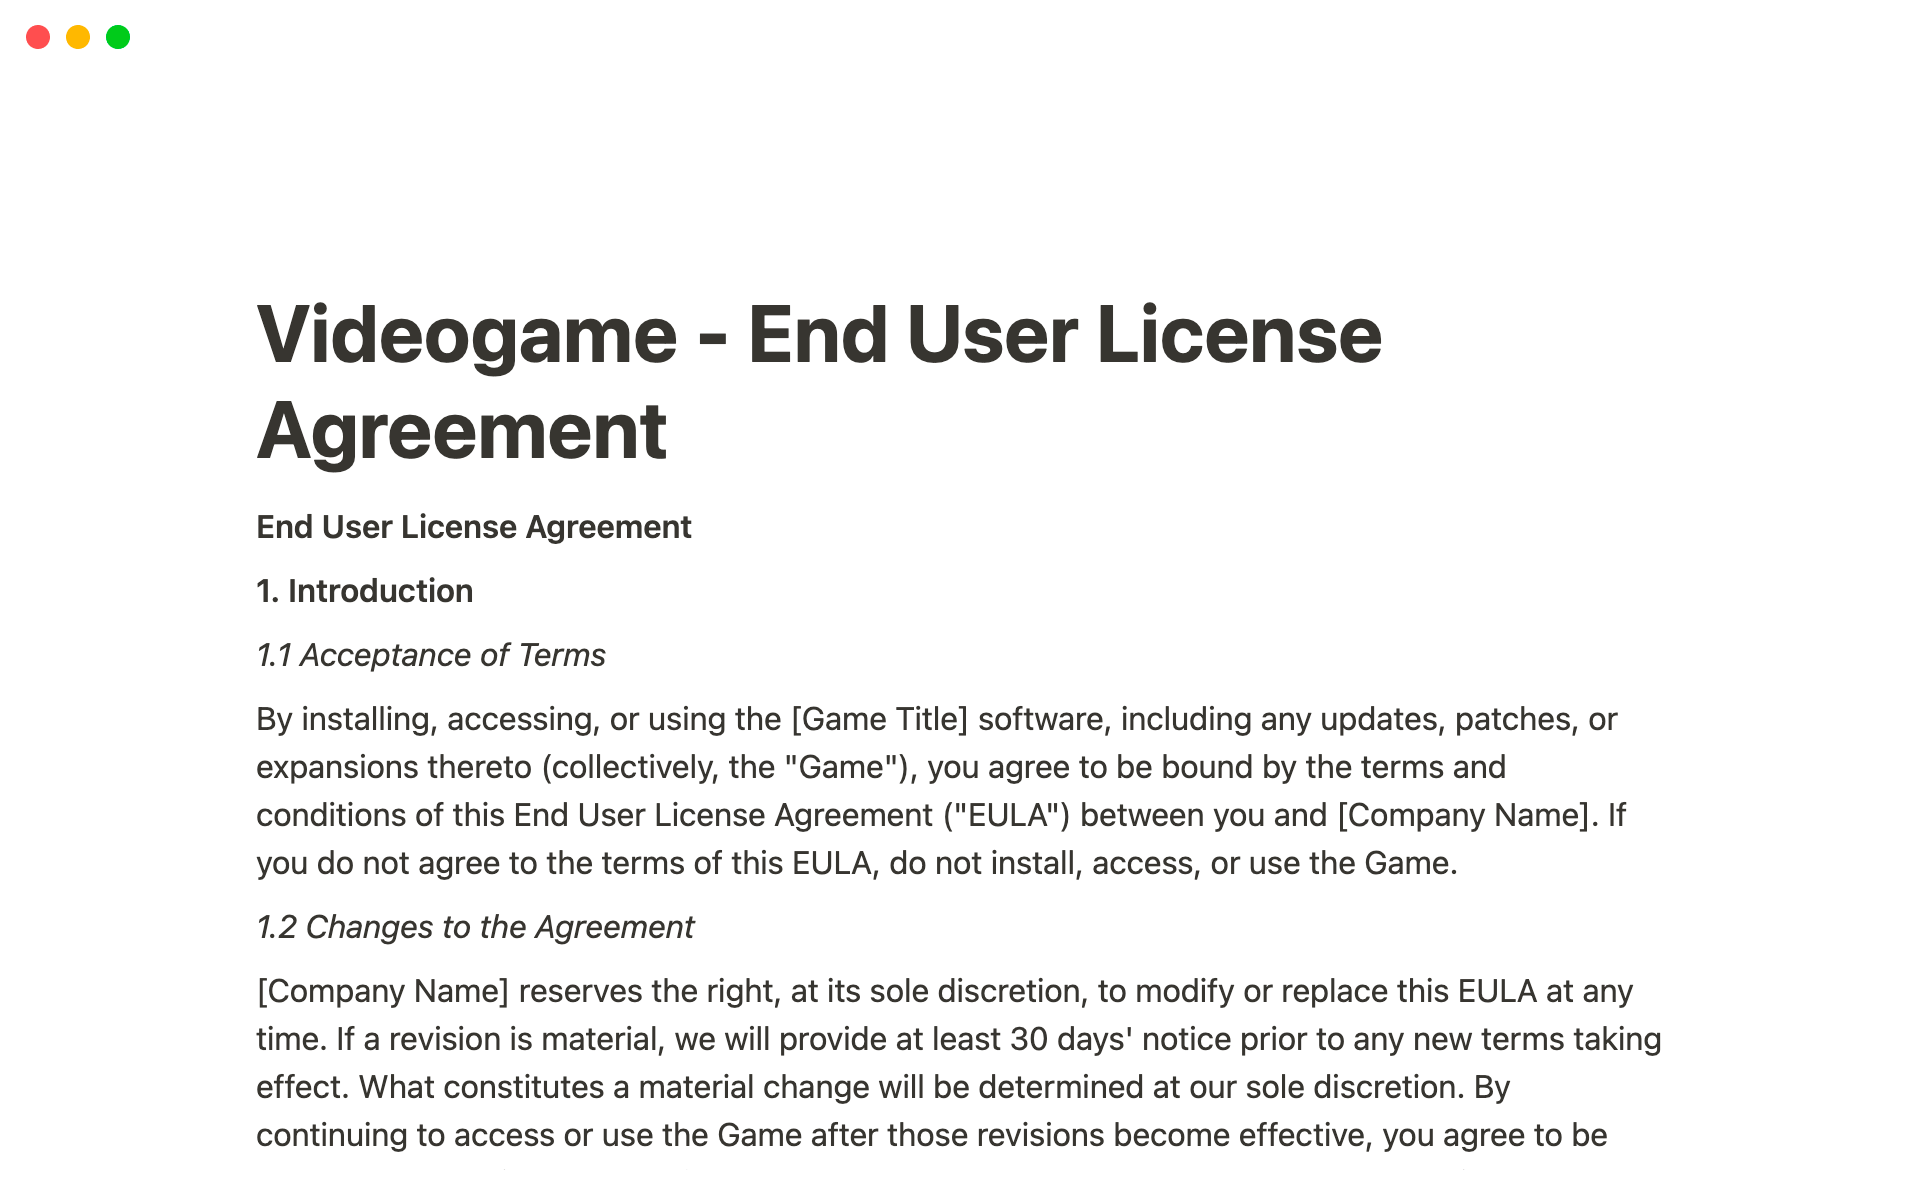 This EULA template provides a comprehensive legal framework for video game creators, outlining the terms and conditions for users while protecting the creator's intellectual property and limiting their liability.